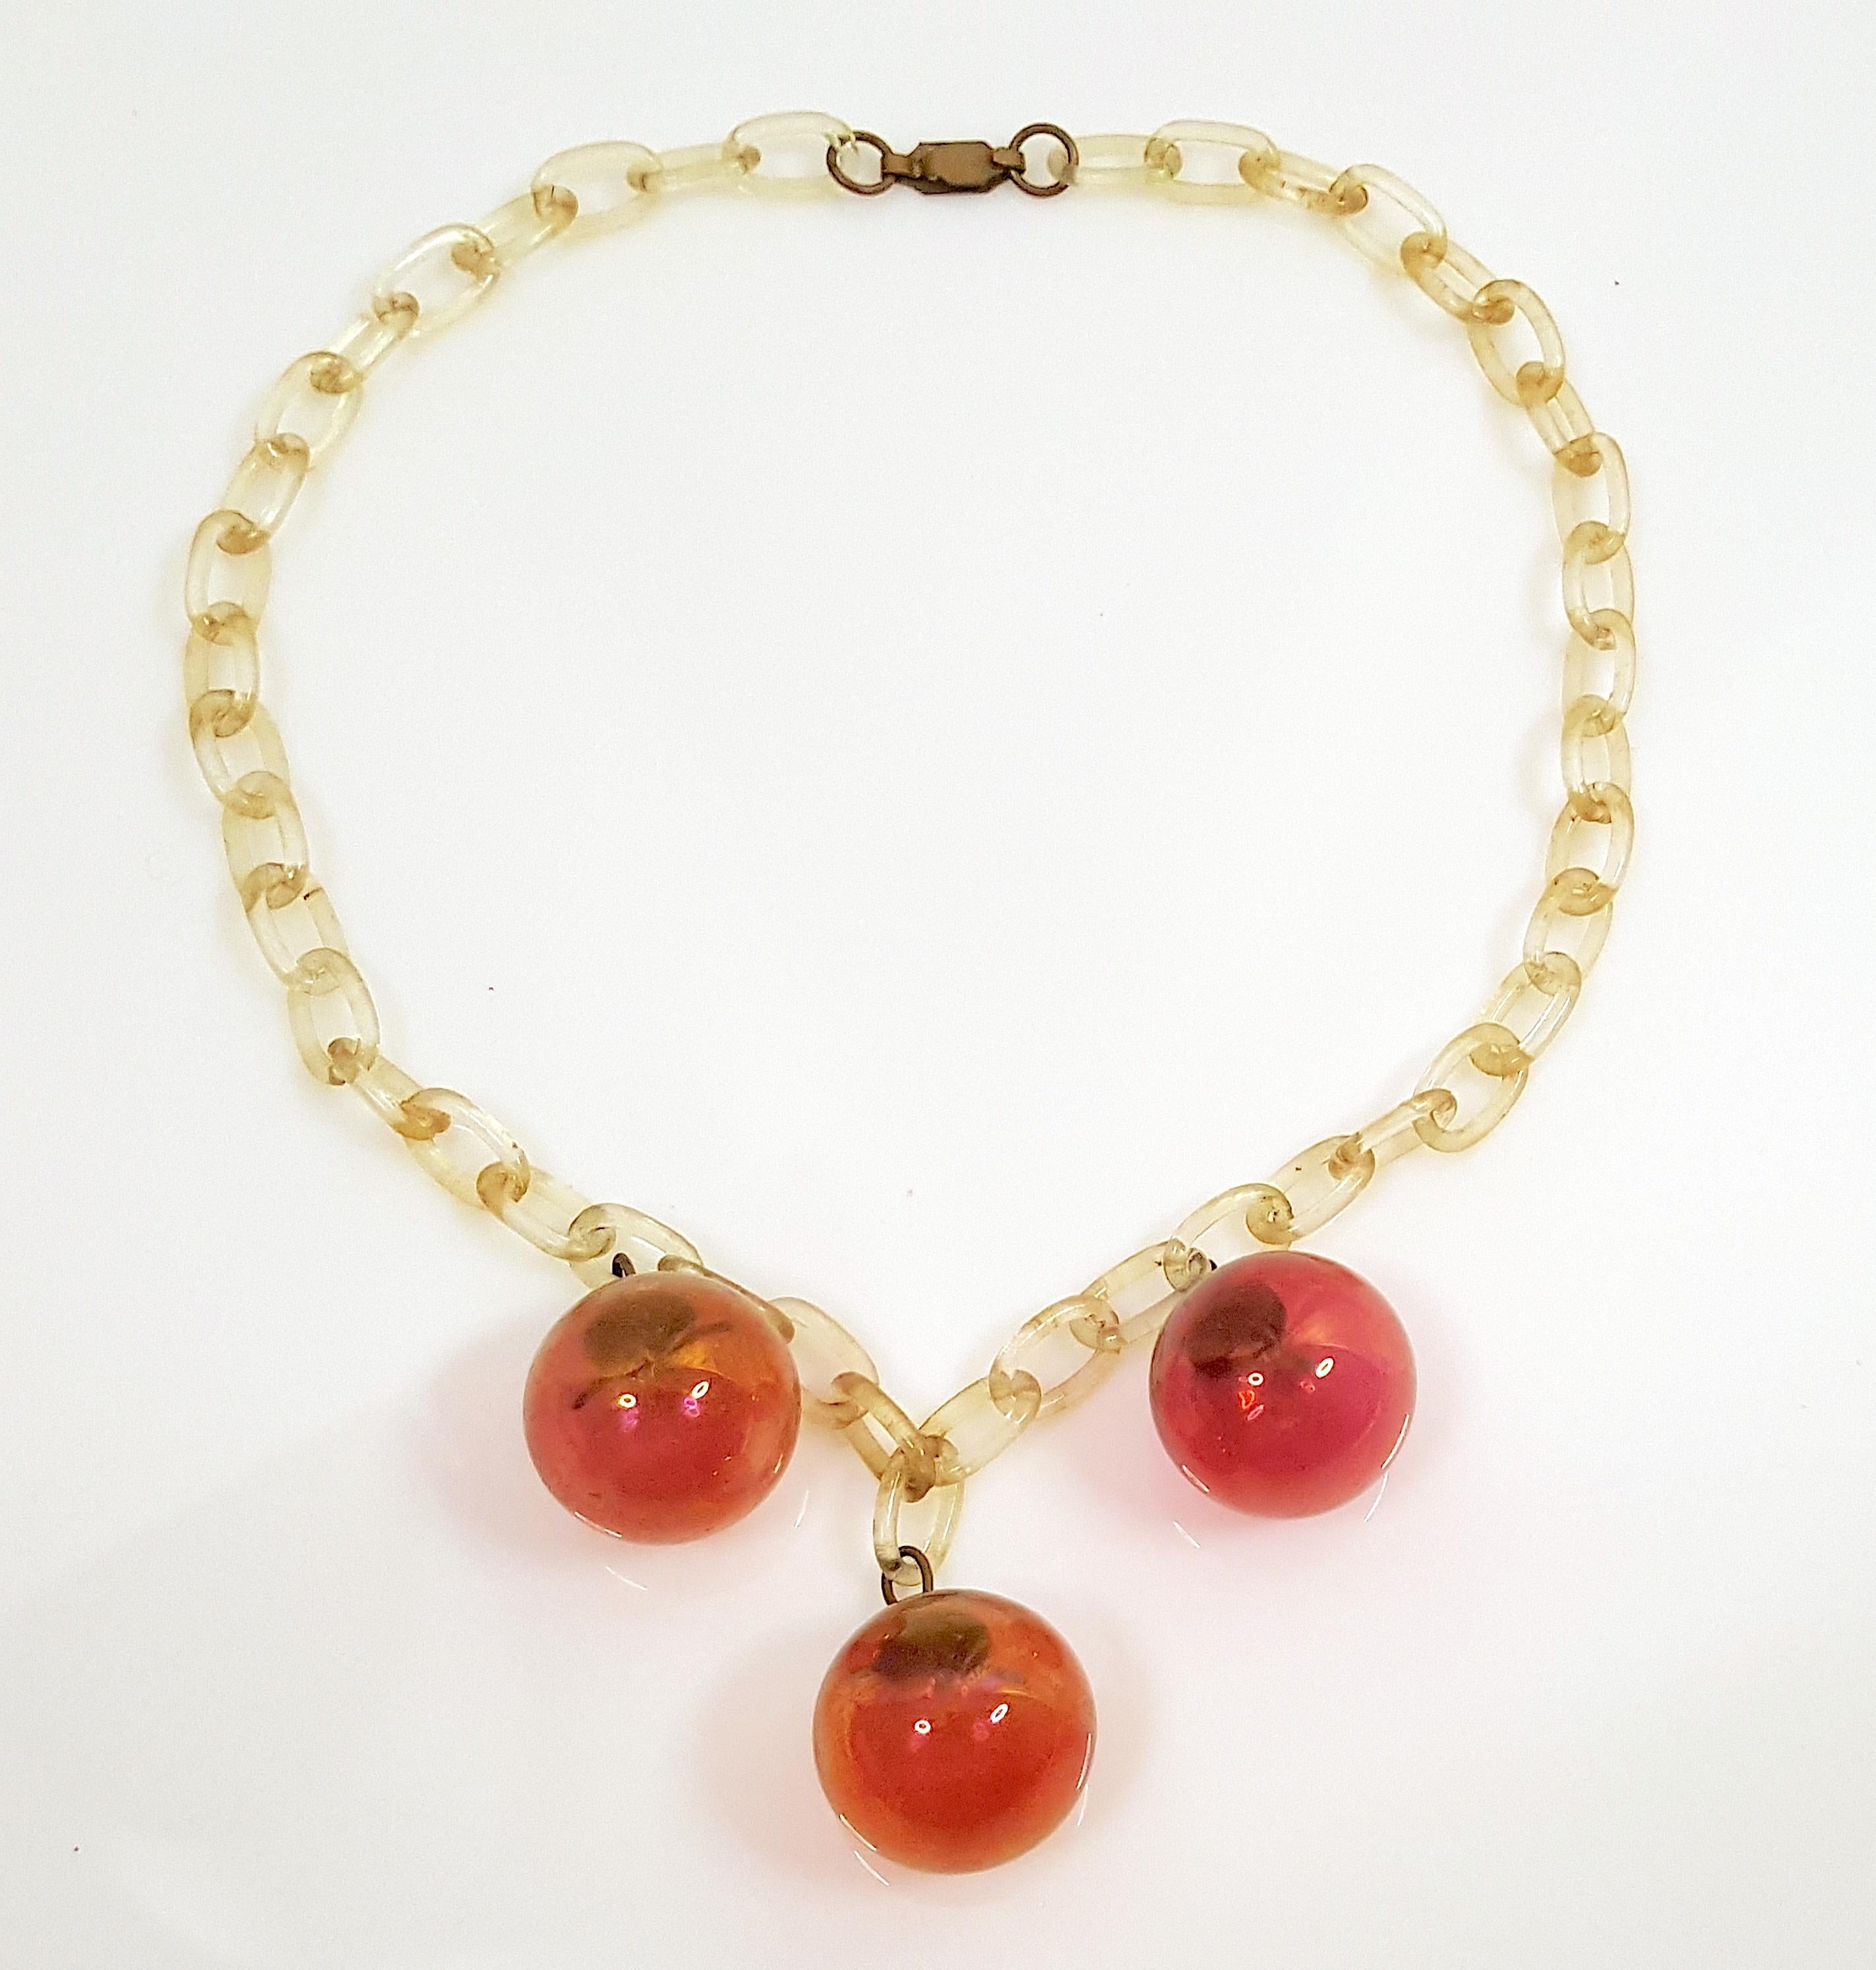 Like elegant multi-pendant festoon necklaces from the mid-1800s, this antique 19th-Century Italian glass choker collar by the Seguso family that founded Vetri d'Arte on the Venetian island of Murano features three one-inch-drop pendants, which here